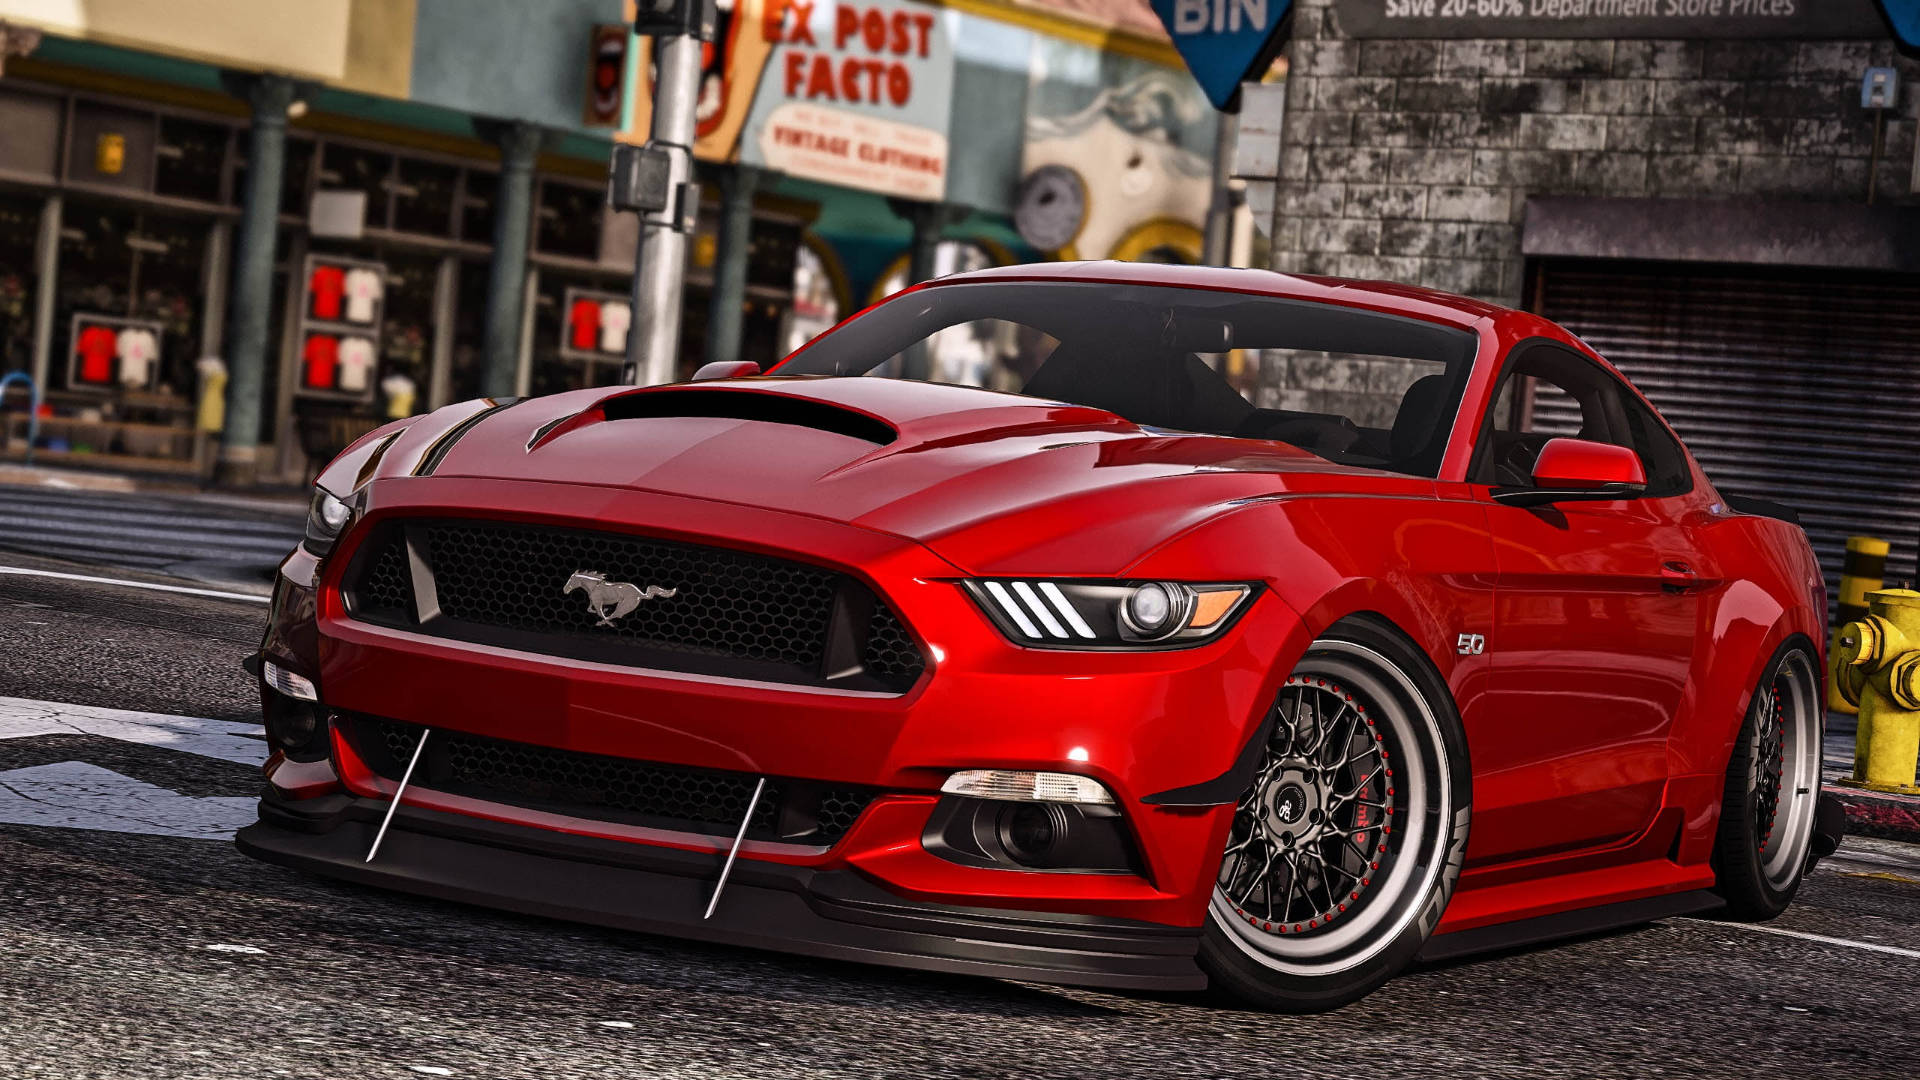 Ford Mustang Hd On The Street Wallpaper